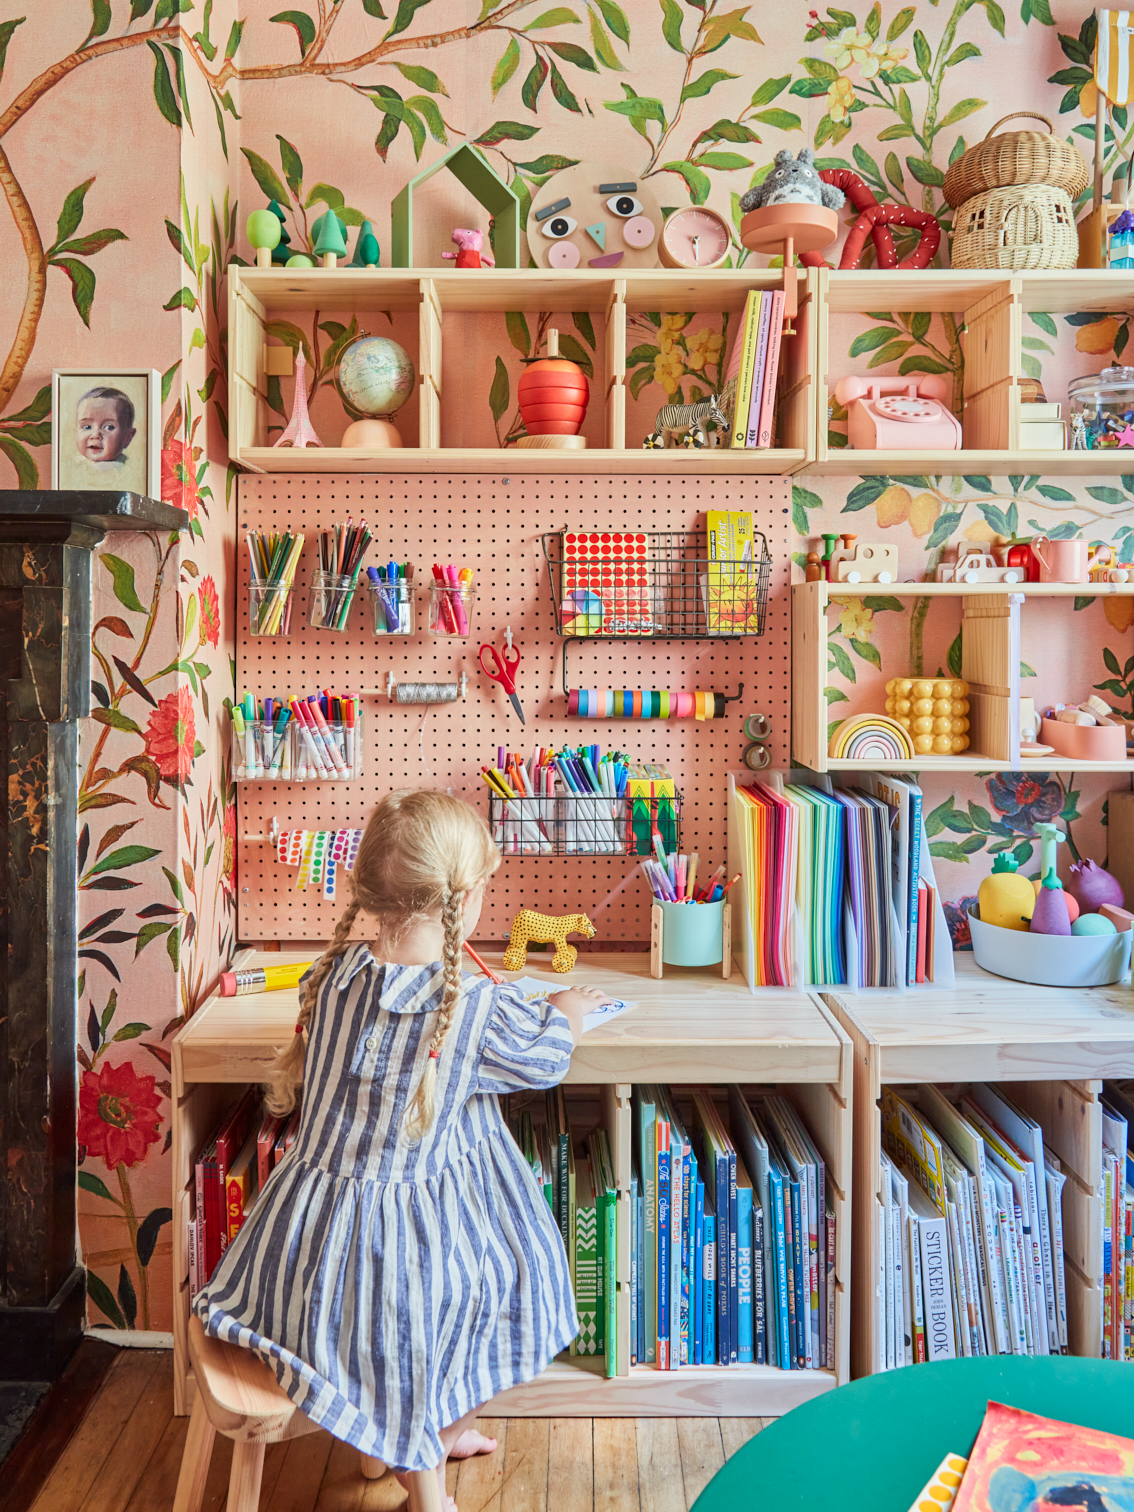 IKEA Storage Doubles as a Paint Easel in Jordan Ferney's Apartment